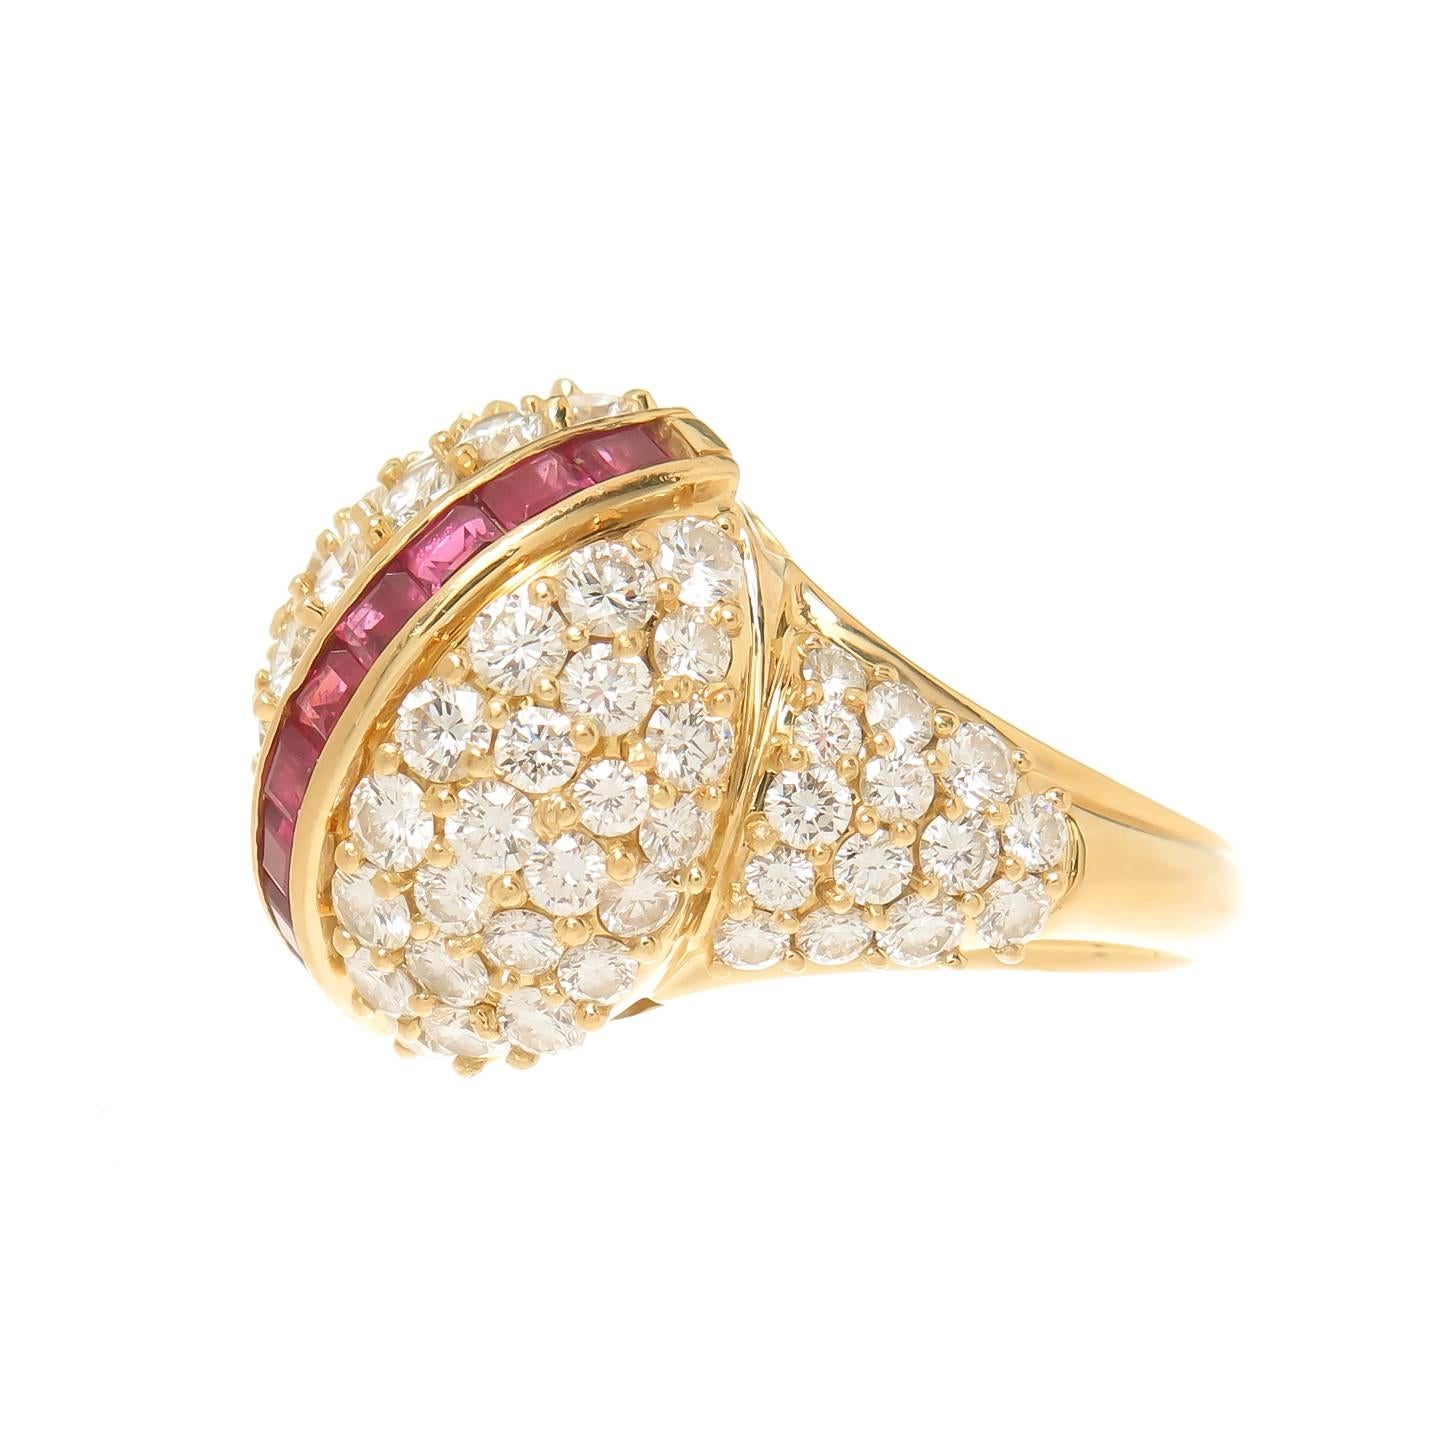 Circa 2000 Hammerman brothers Dome Ring, 18K yellow Gold and set with 3 Carats of Round Brilliant cut Diamonds  that total 3 carats and grade as F-G in Color and VS in Clarity. Further set with Square Cut Rubies of very fine Color. The ring top